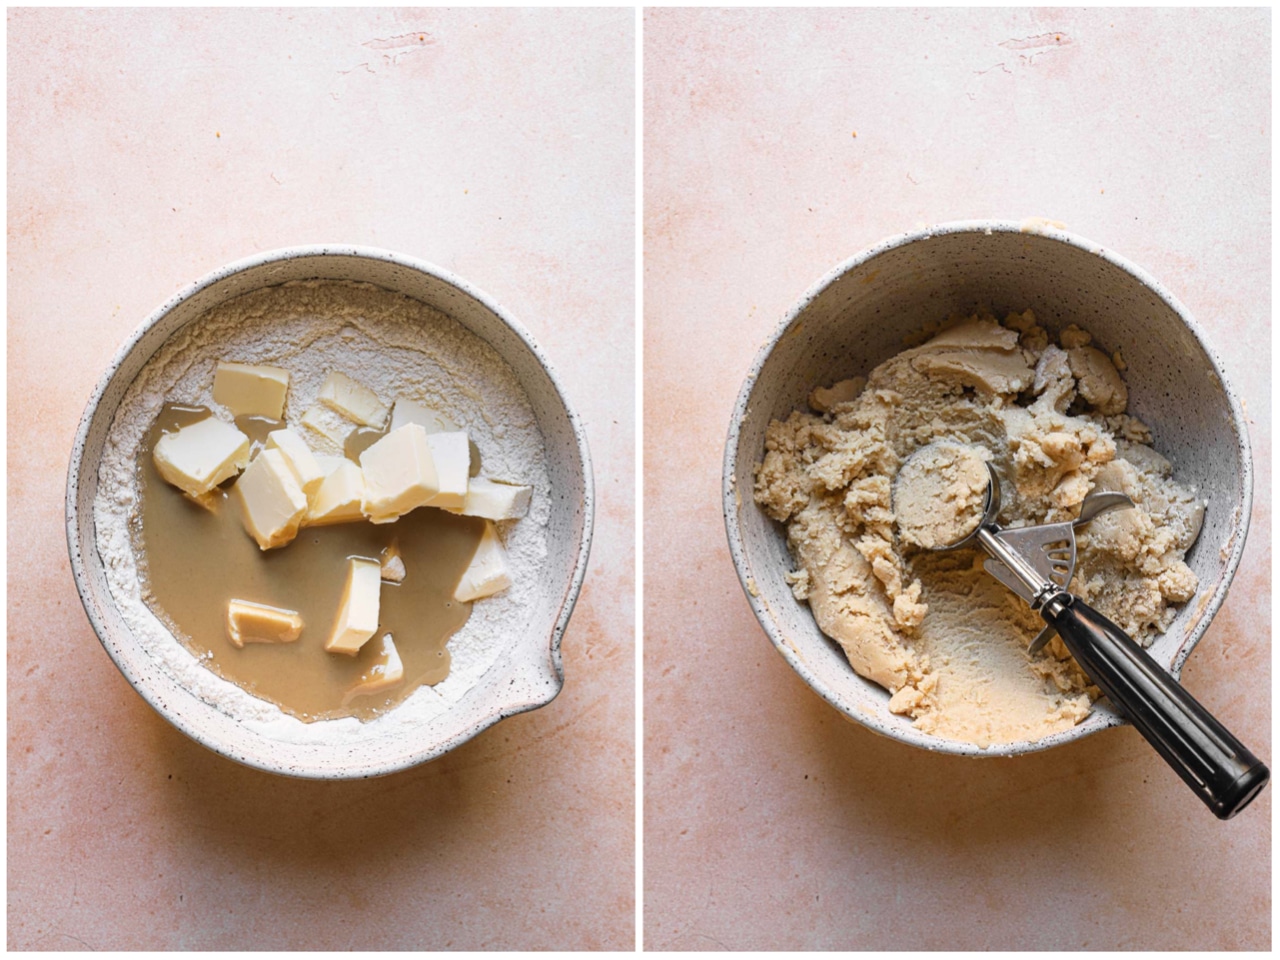 A side-by-side photo. The left side shows a mixing bowl filled with flour, tahini, and cubes of butter. On the right, the dough has been mixed and a cookie scoop rests inside.